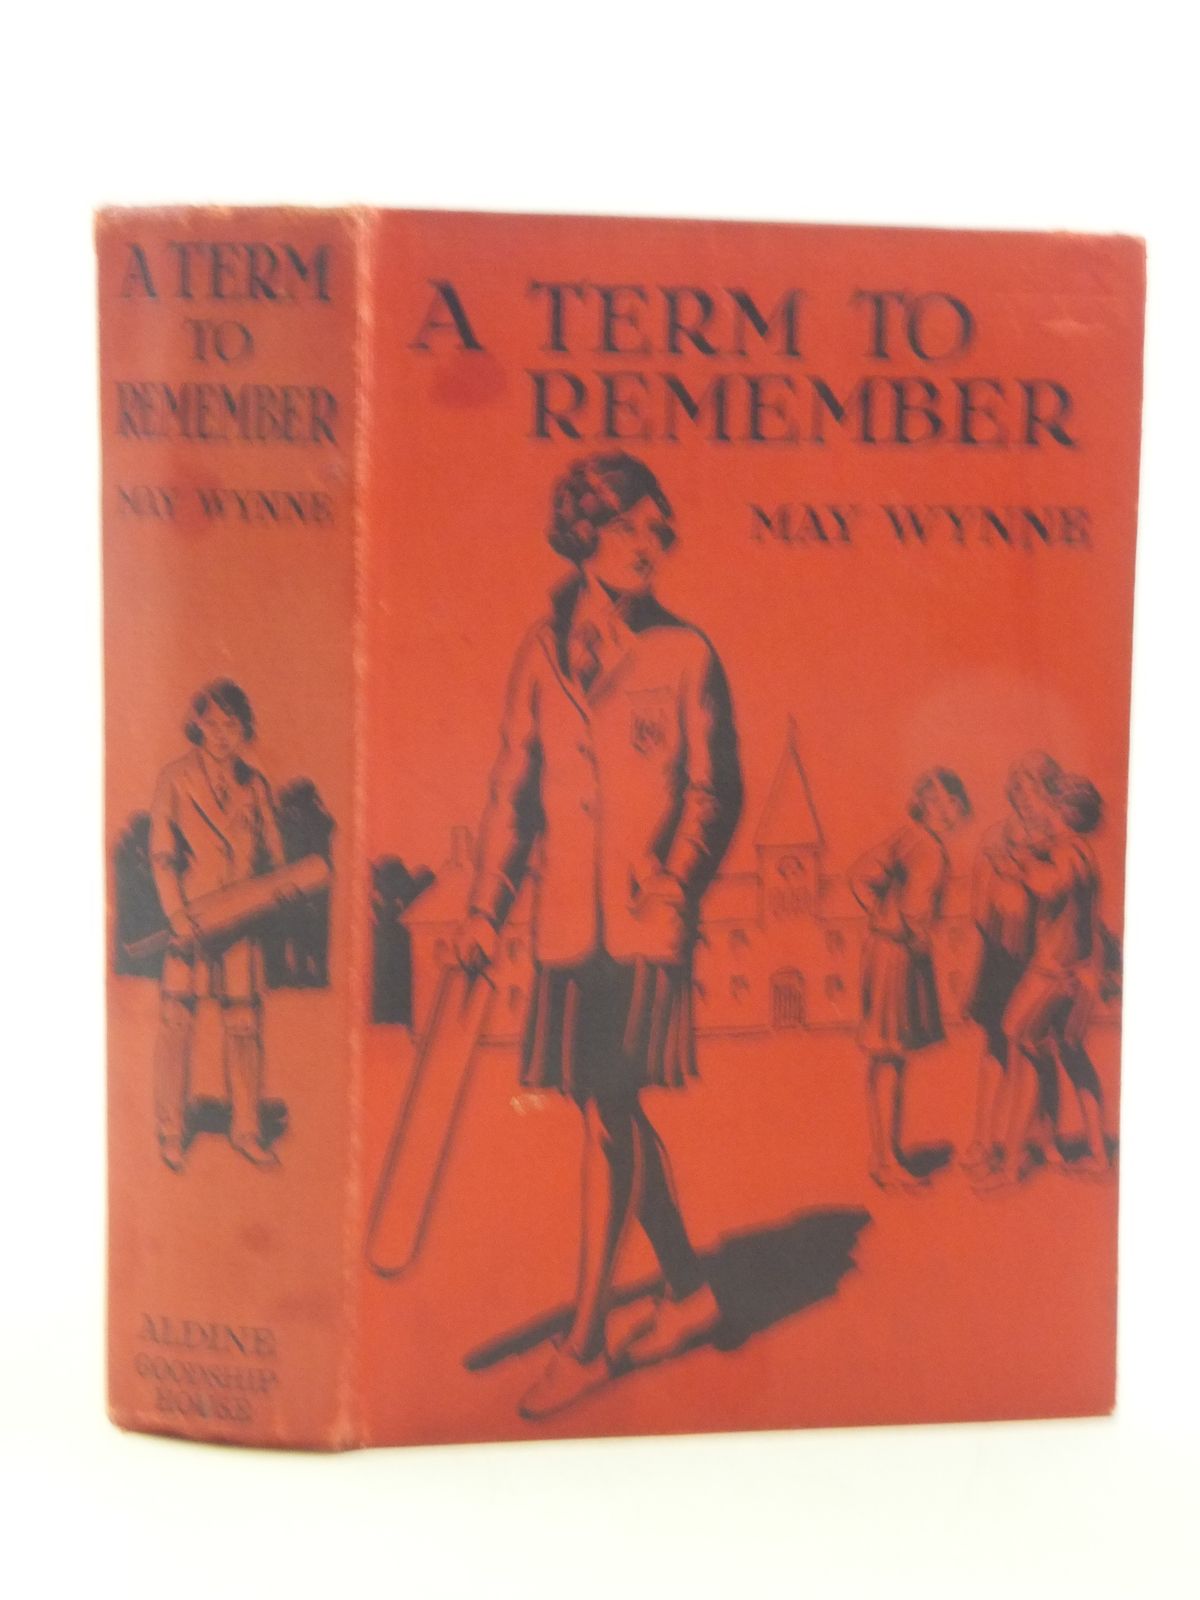 Photo of A TERM TO REMEMBER written by Wynne, May illustrated by Lumley, Savile published by Aldine Publishing Company (STOCK CODE: 1605737)  for sale by Stella & Rose's Books